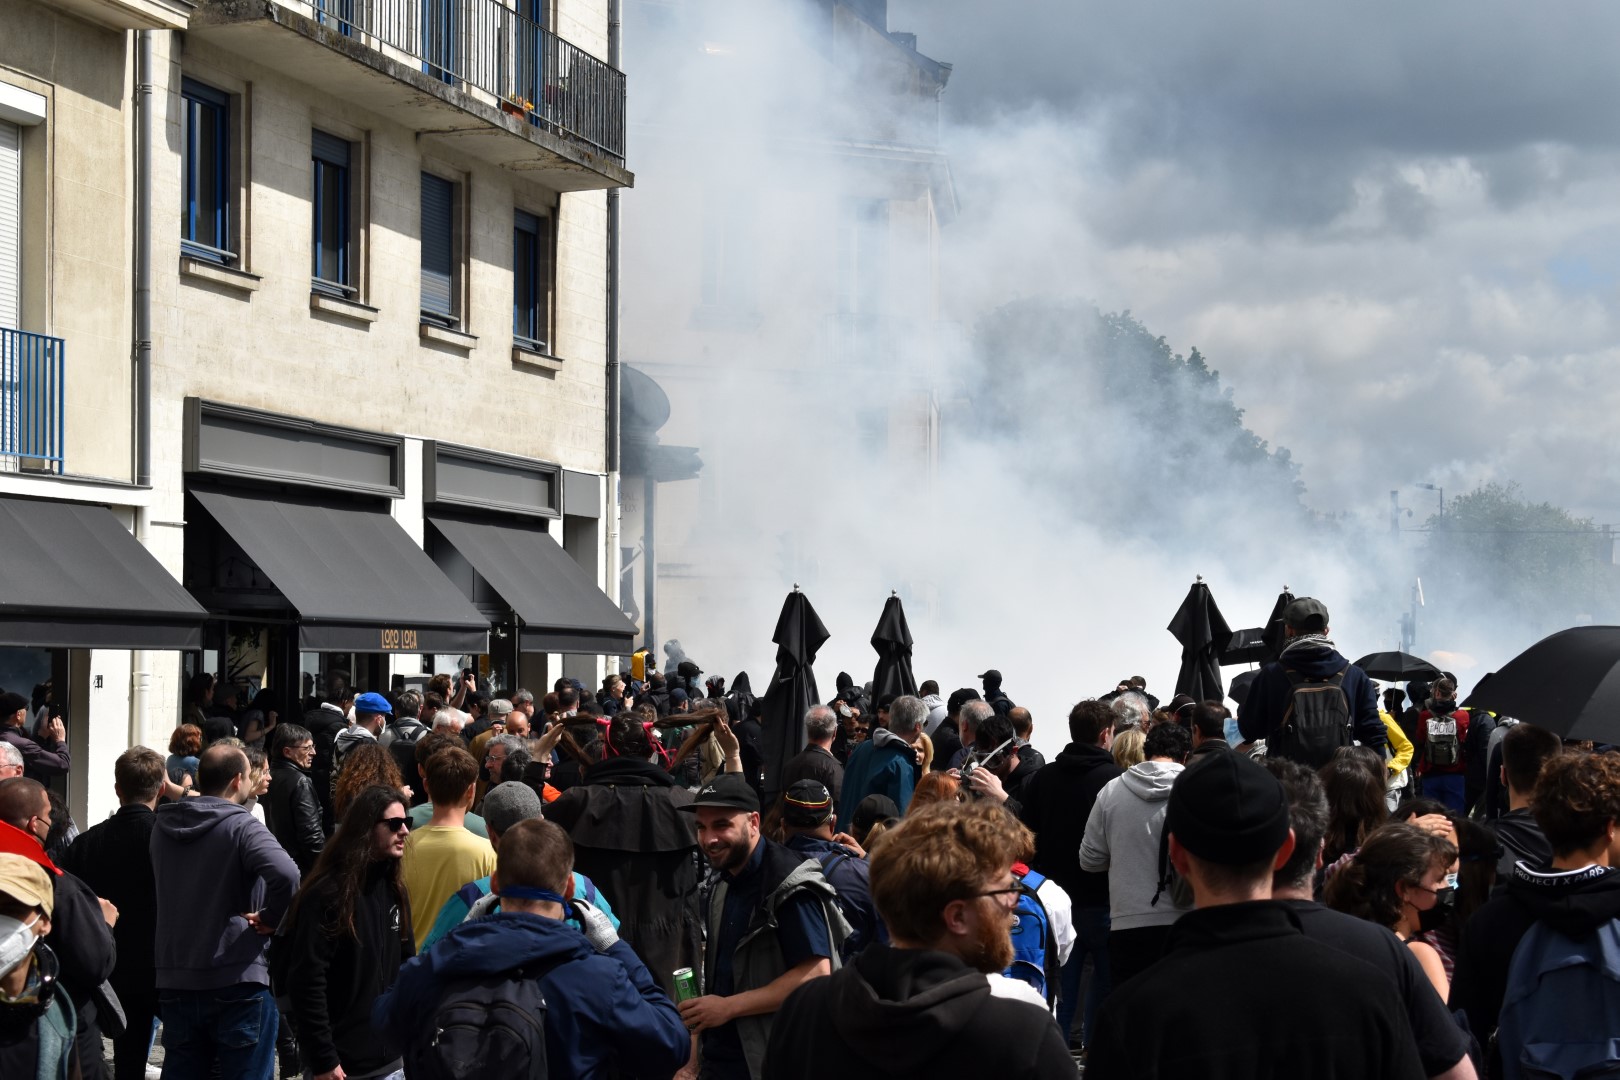 First tear gas, May 1 protest, Nantes